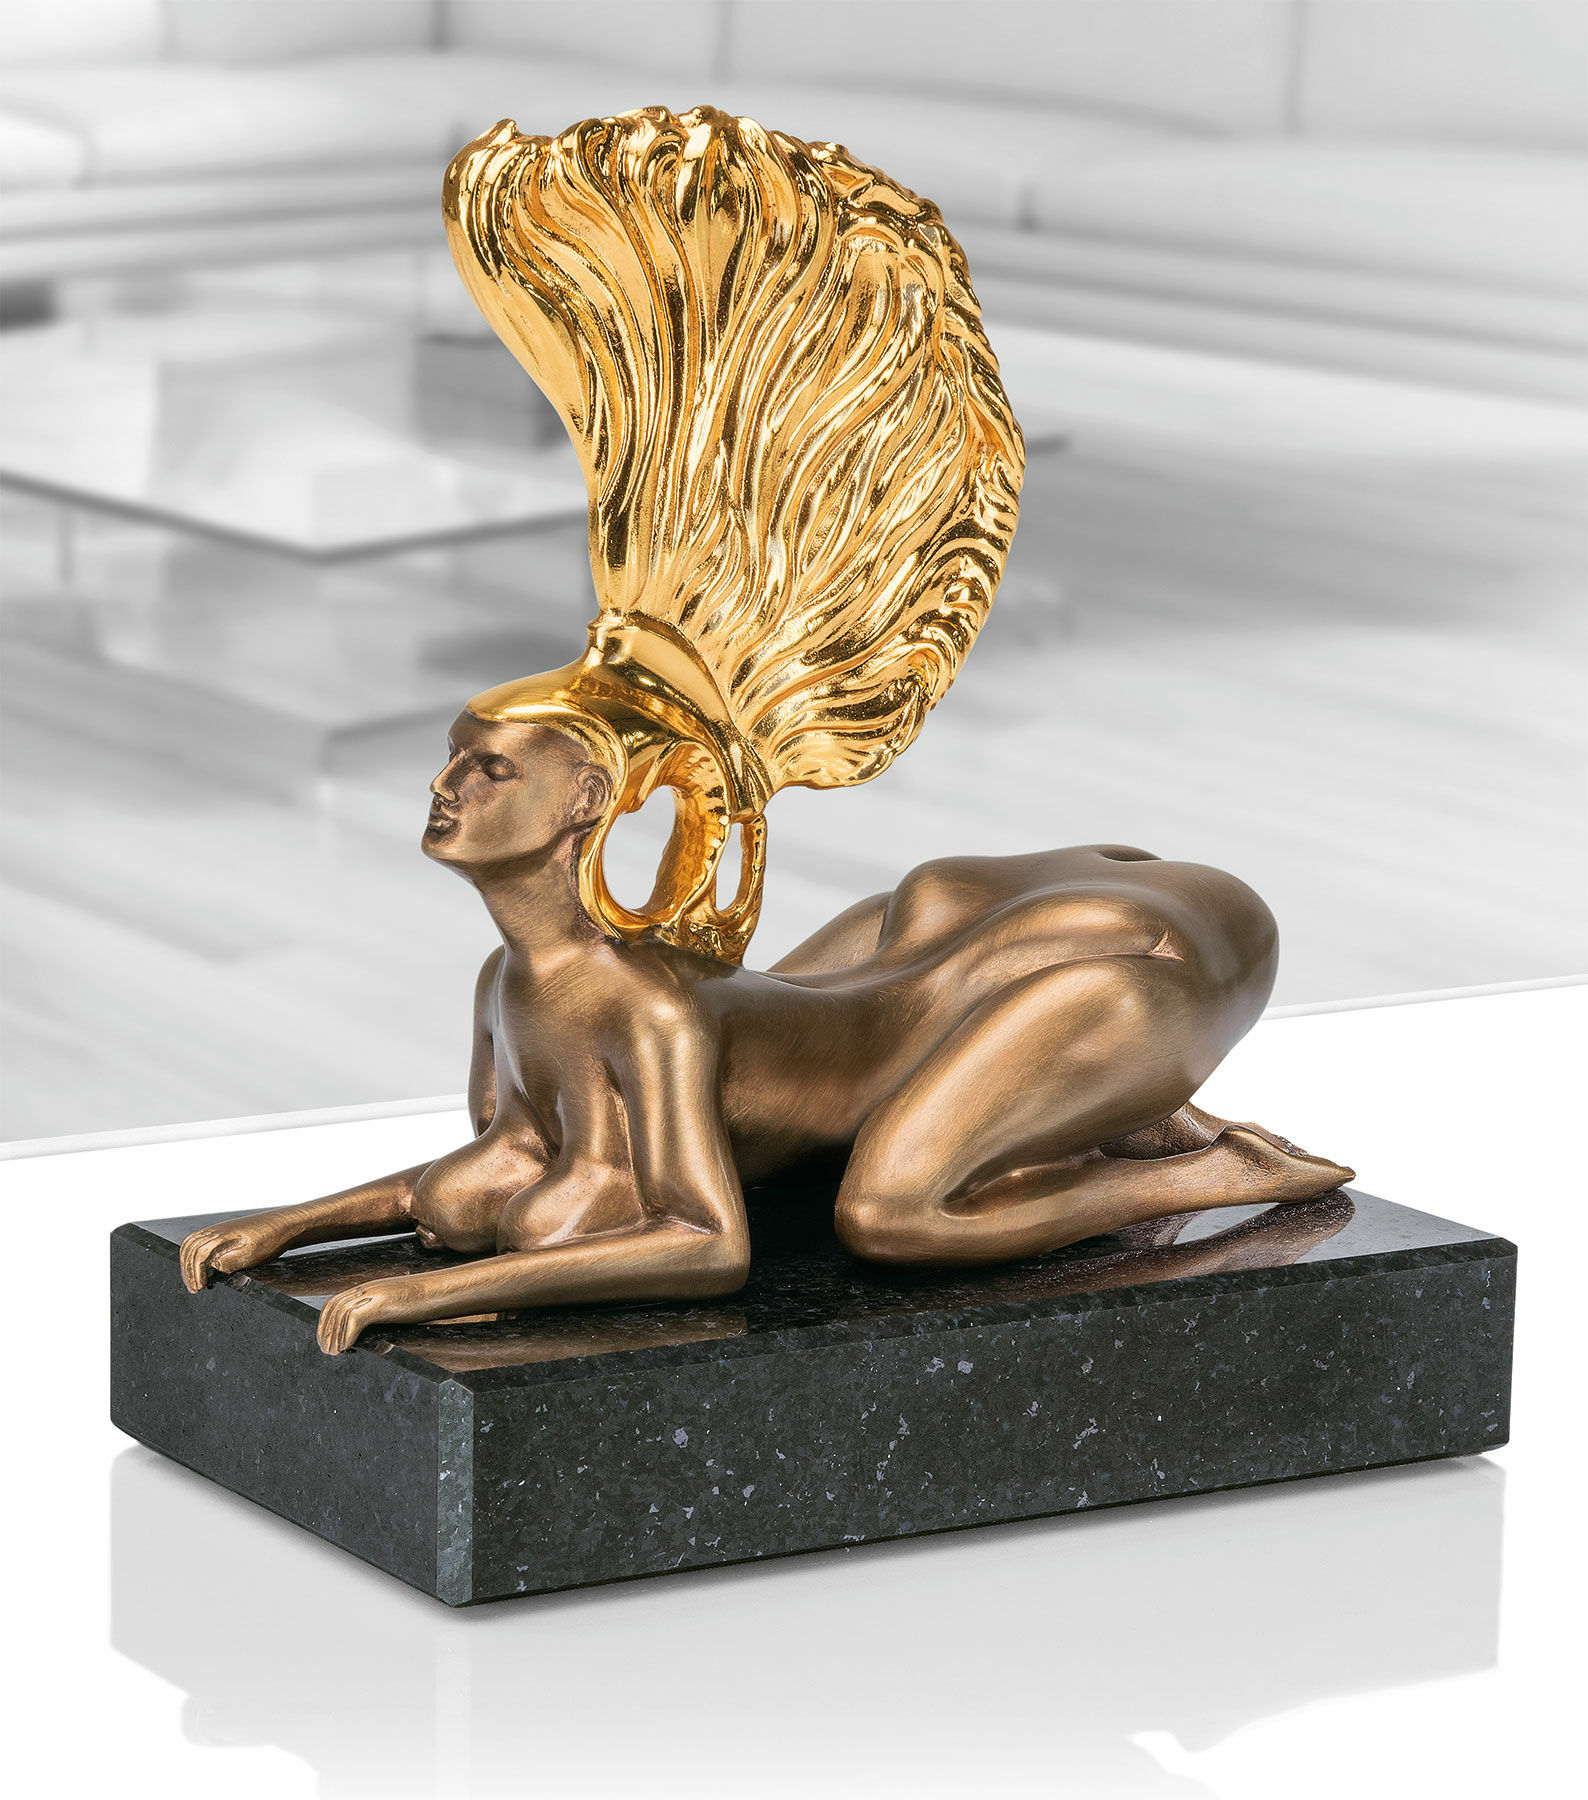 Sculpture "The Sphinx with the Golden Helmet - The Miniature", bronze partially gold-plated by Ernst Fuchs